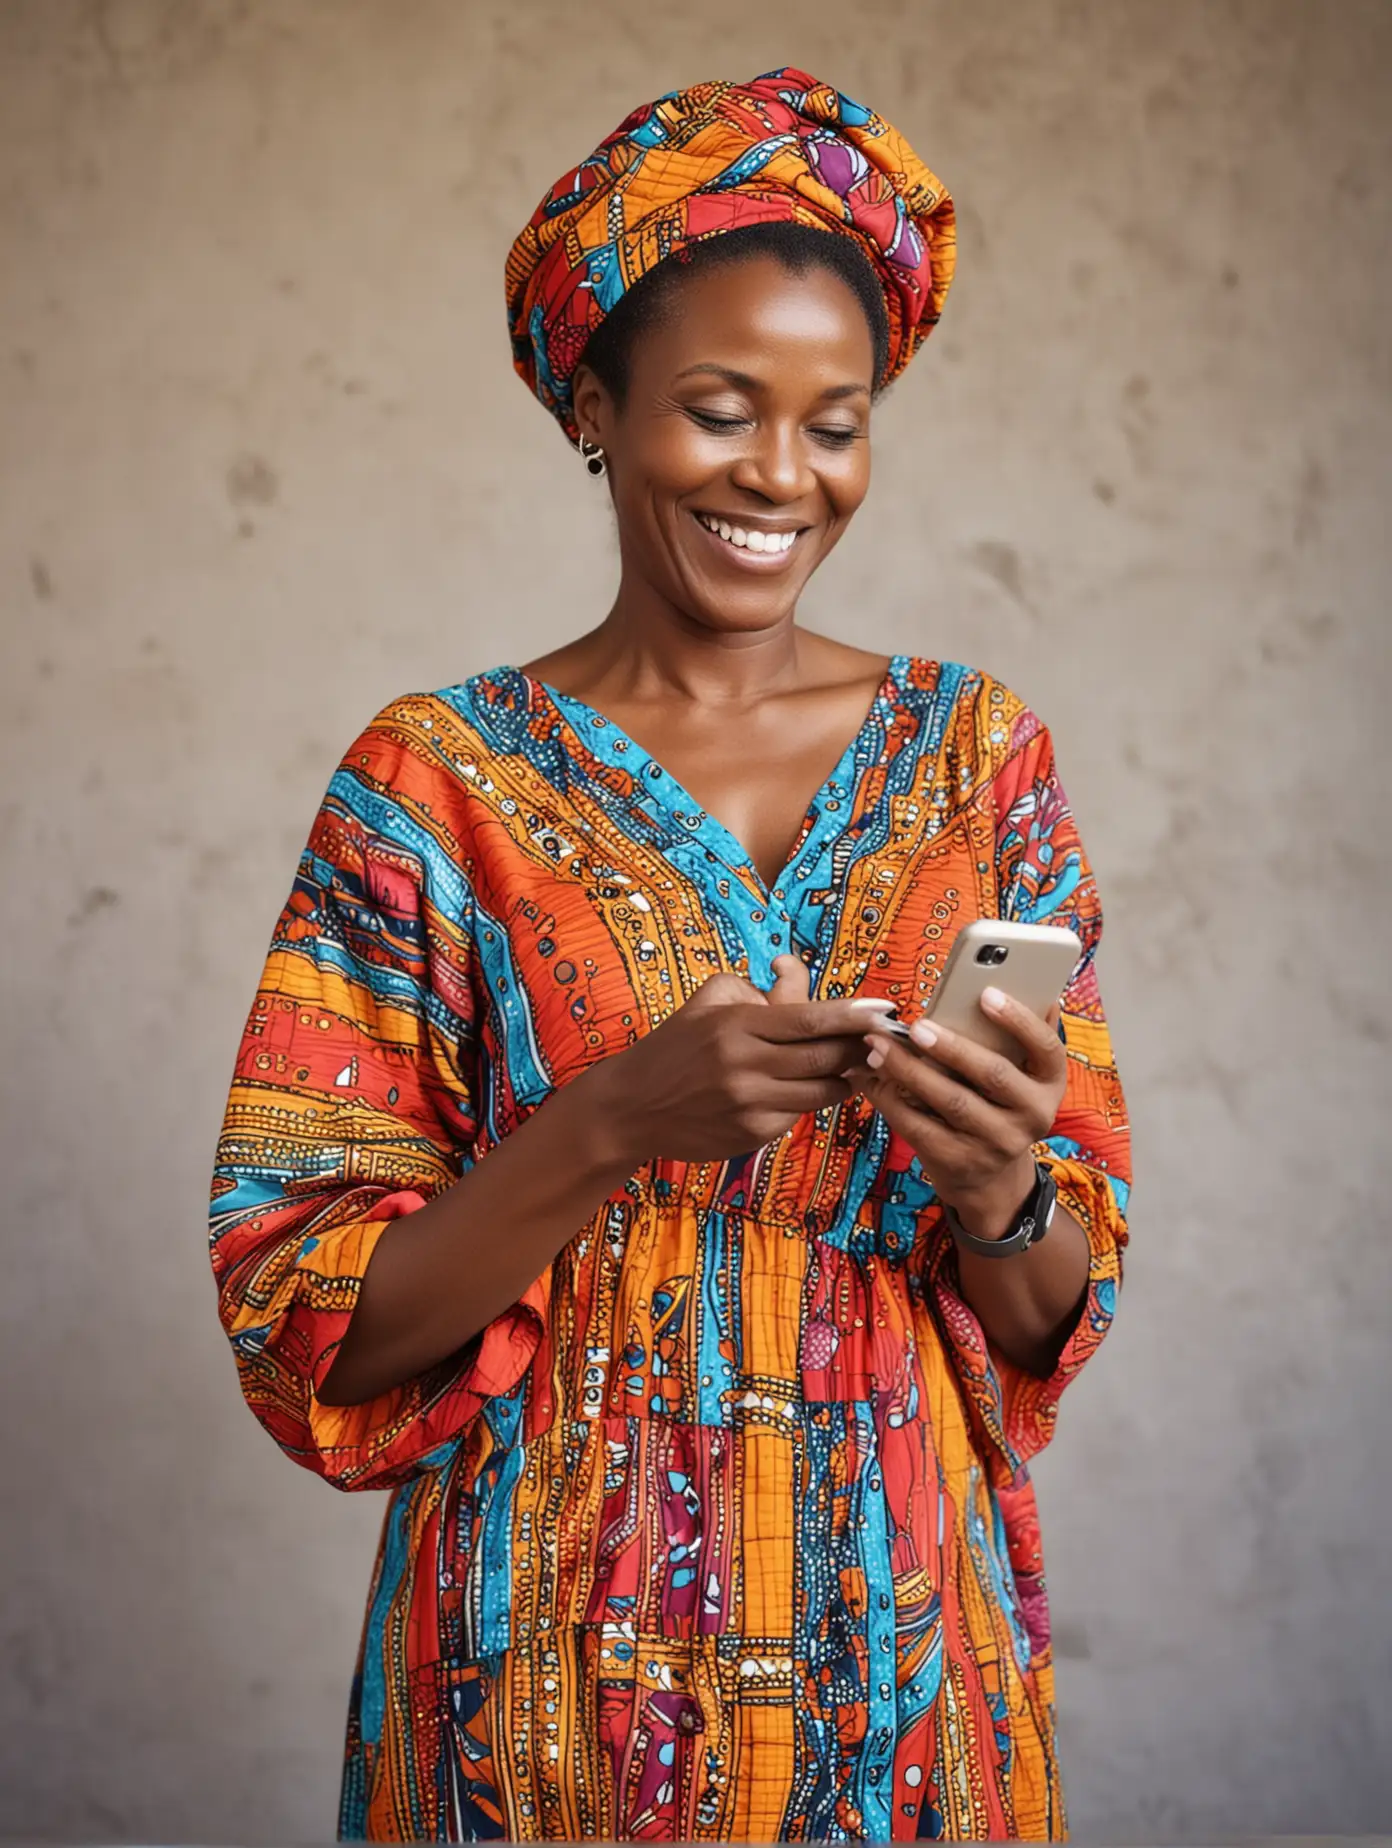 Cheerful African Woman in Vibrant Attire Reading Smartphone Messages